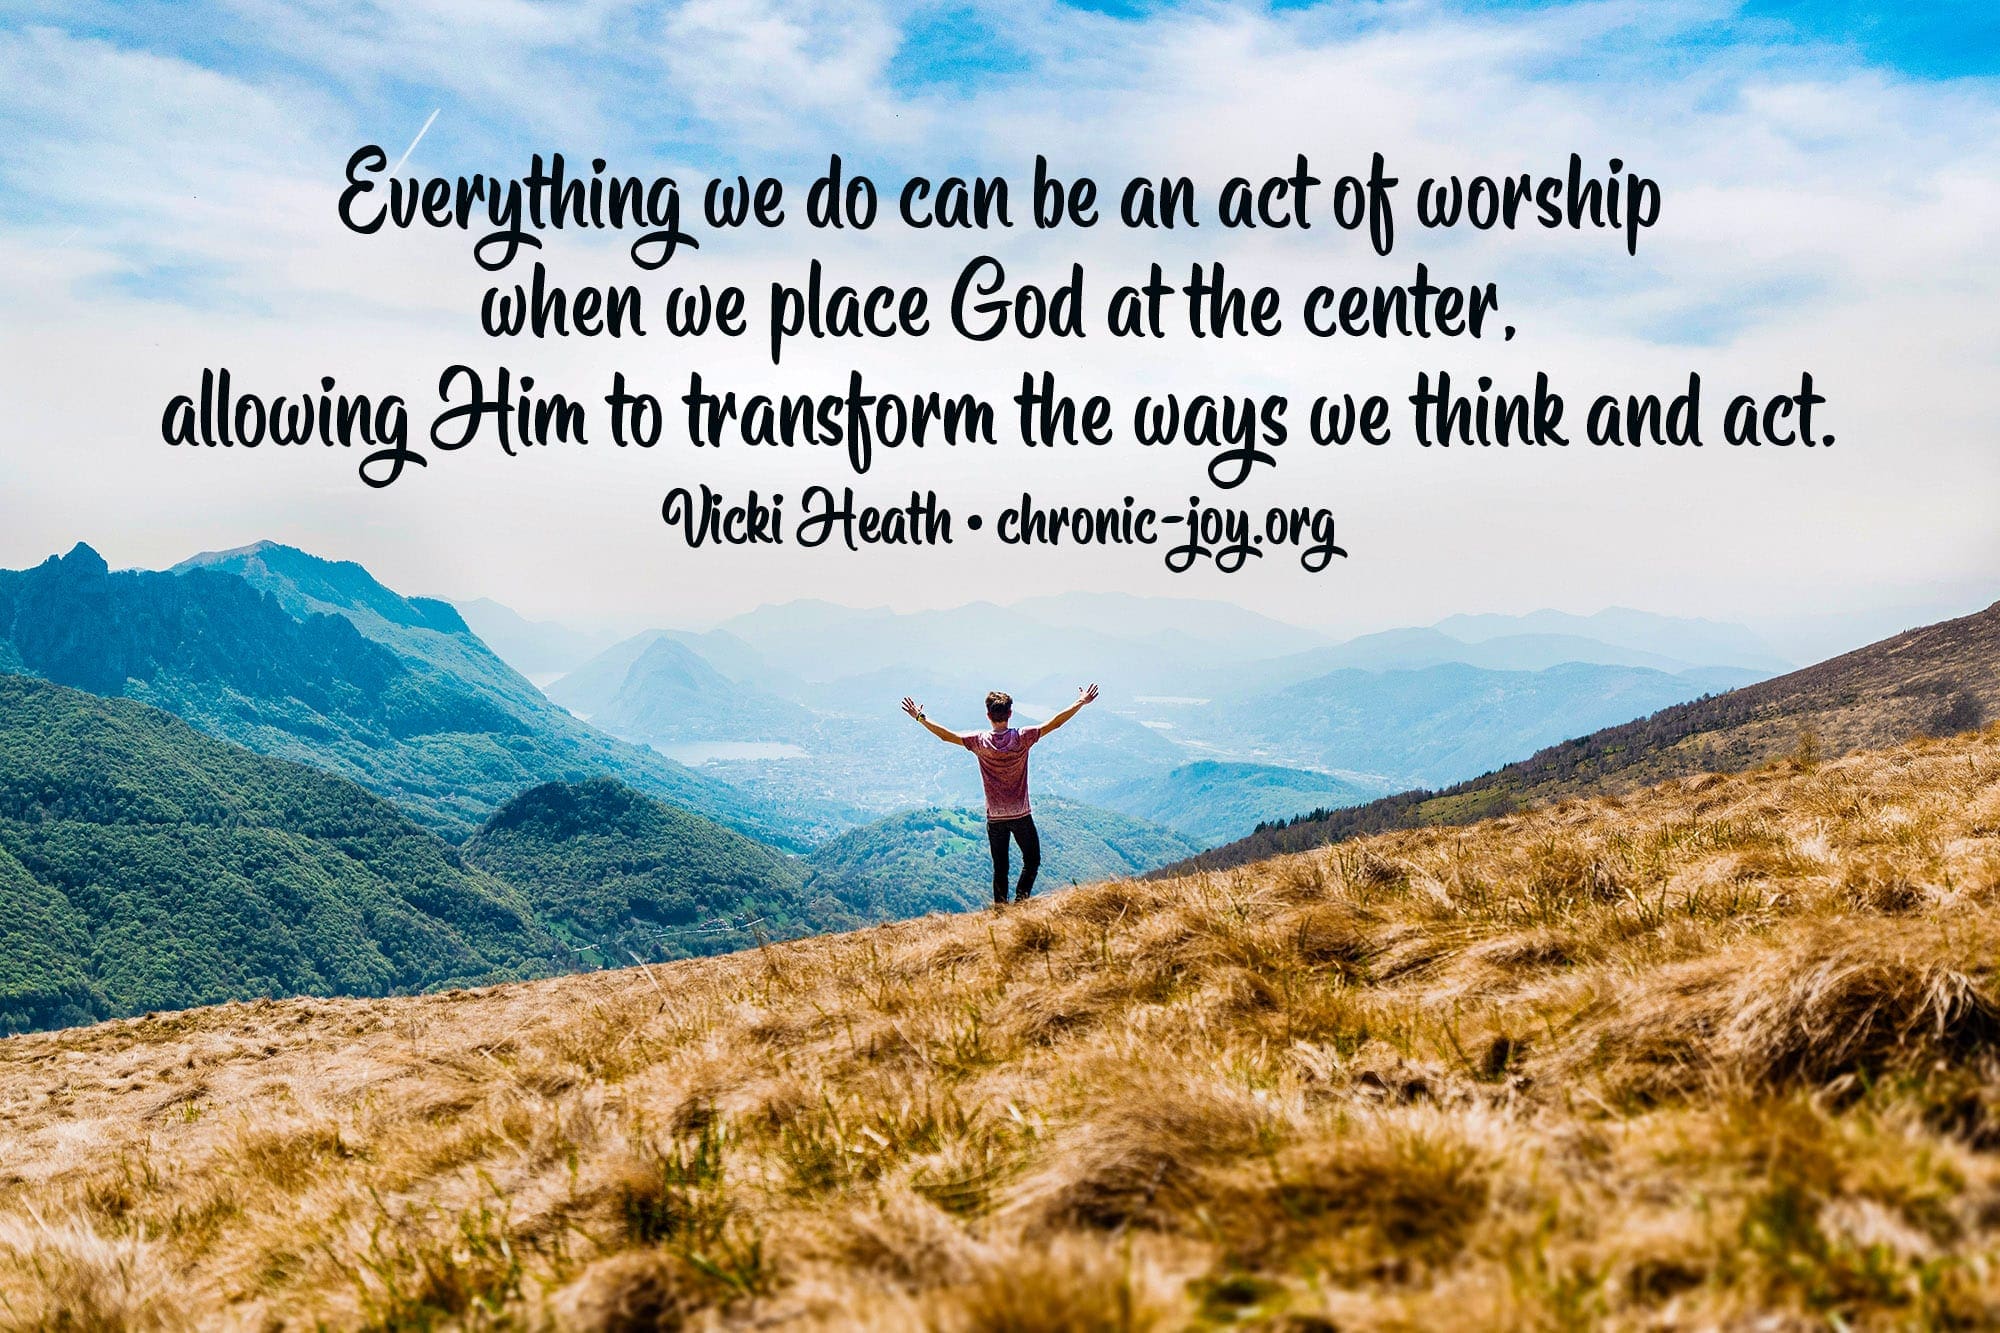 "Everything we do can be an act of worship when we place God at the center, allowing Him to transform the ways we think and act." Vicki Heath